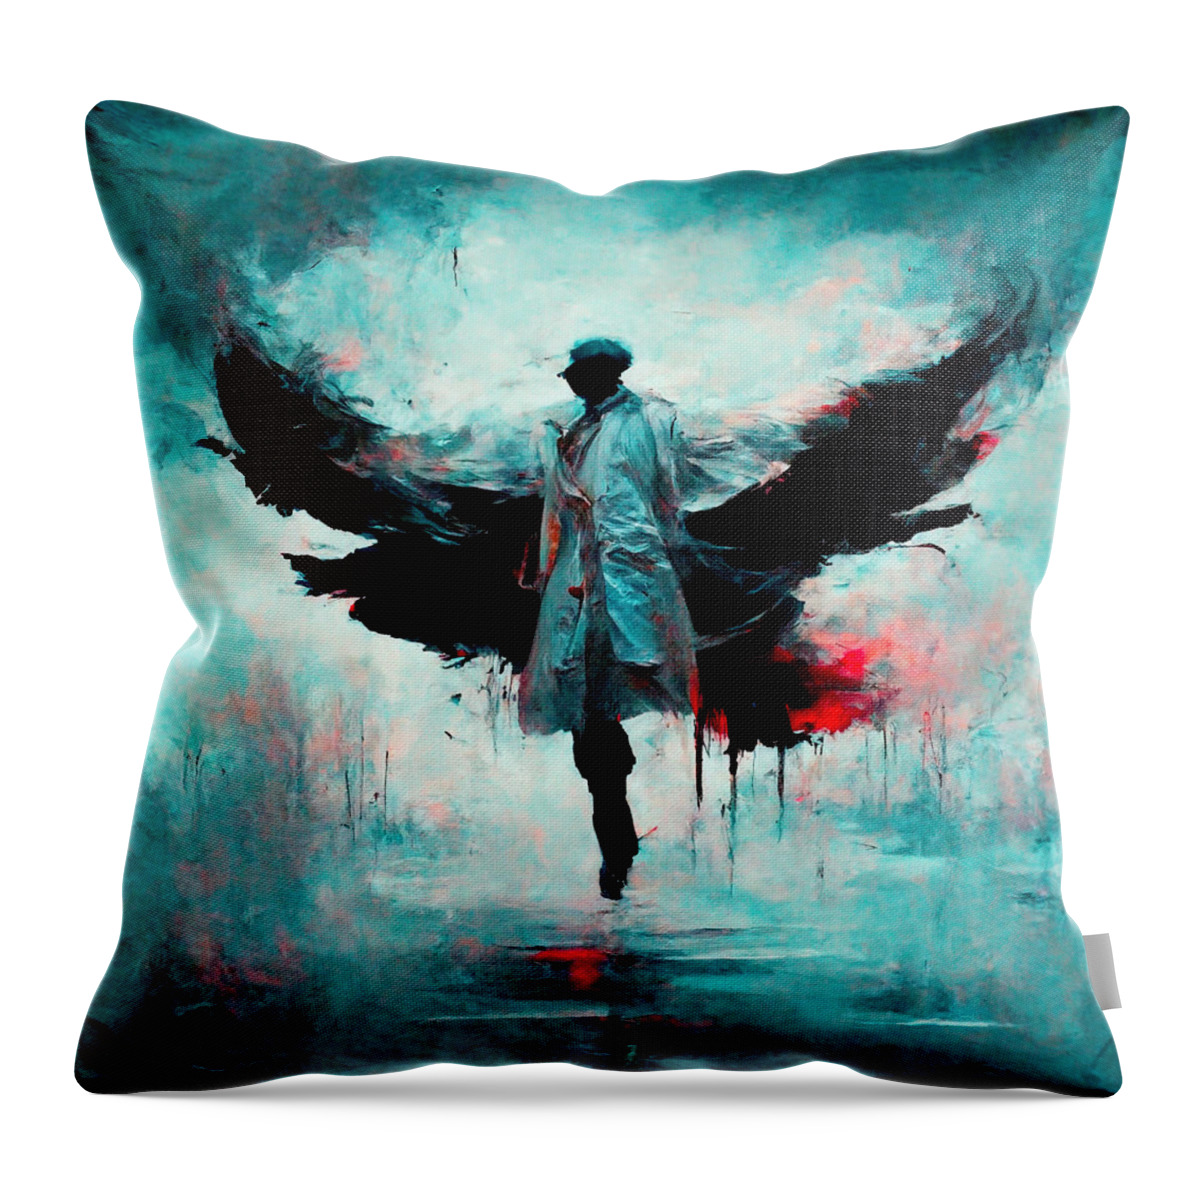 Trenchcoats Throw Pillow featuring the digital art Trenchcoats #3 by Craig Boehman